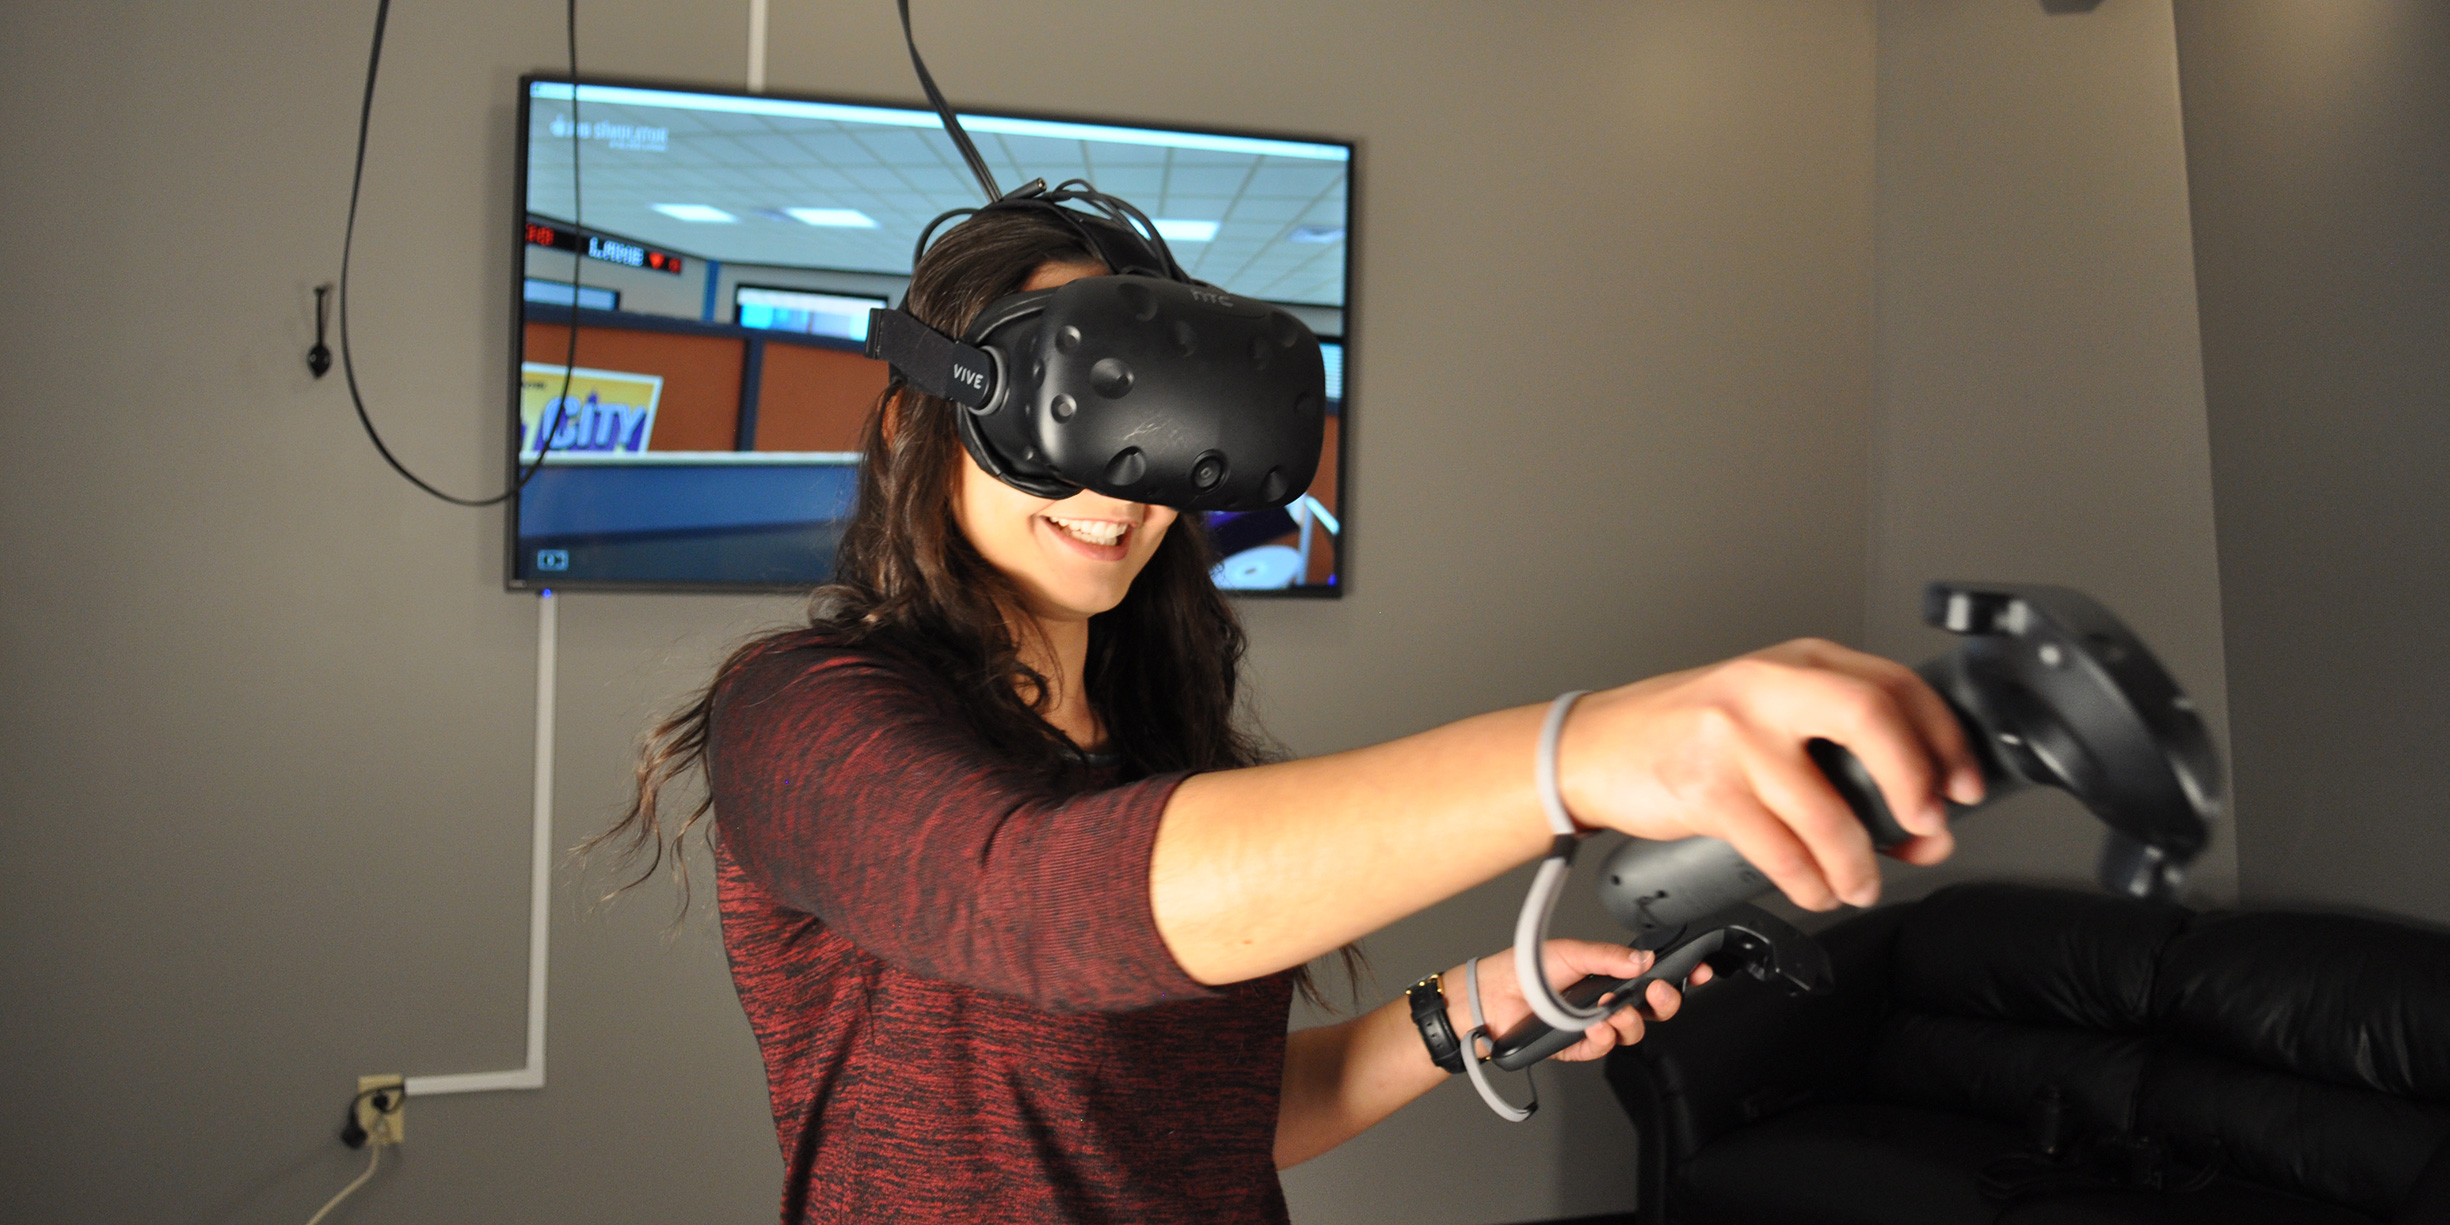 Are you looking for reasons to visit Regina Saskatchewan? The Grid VR is a virtual reality arcade that is a must-see destination in Regina. We will make sure that you remember your visit to Regina. In a relaxed setting, with numerous games and experiences, you can have fun with your whole group.